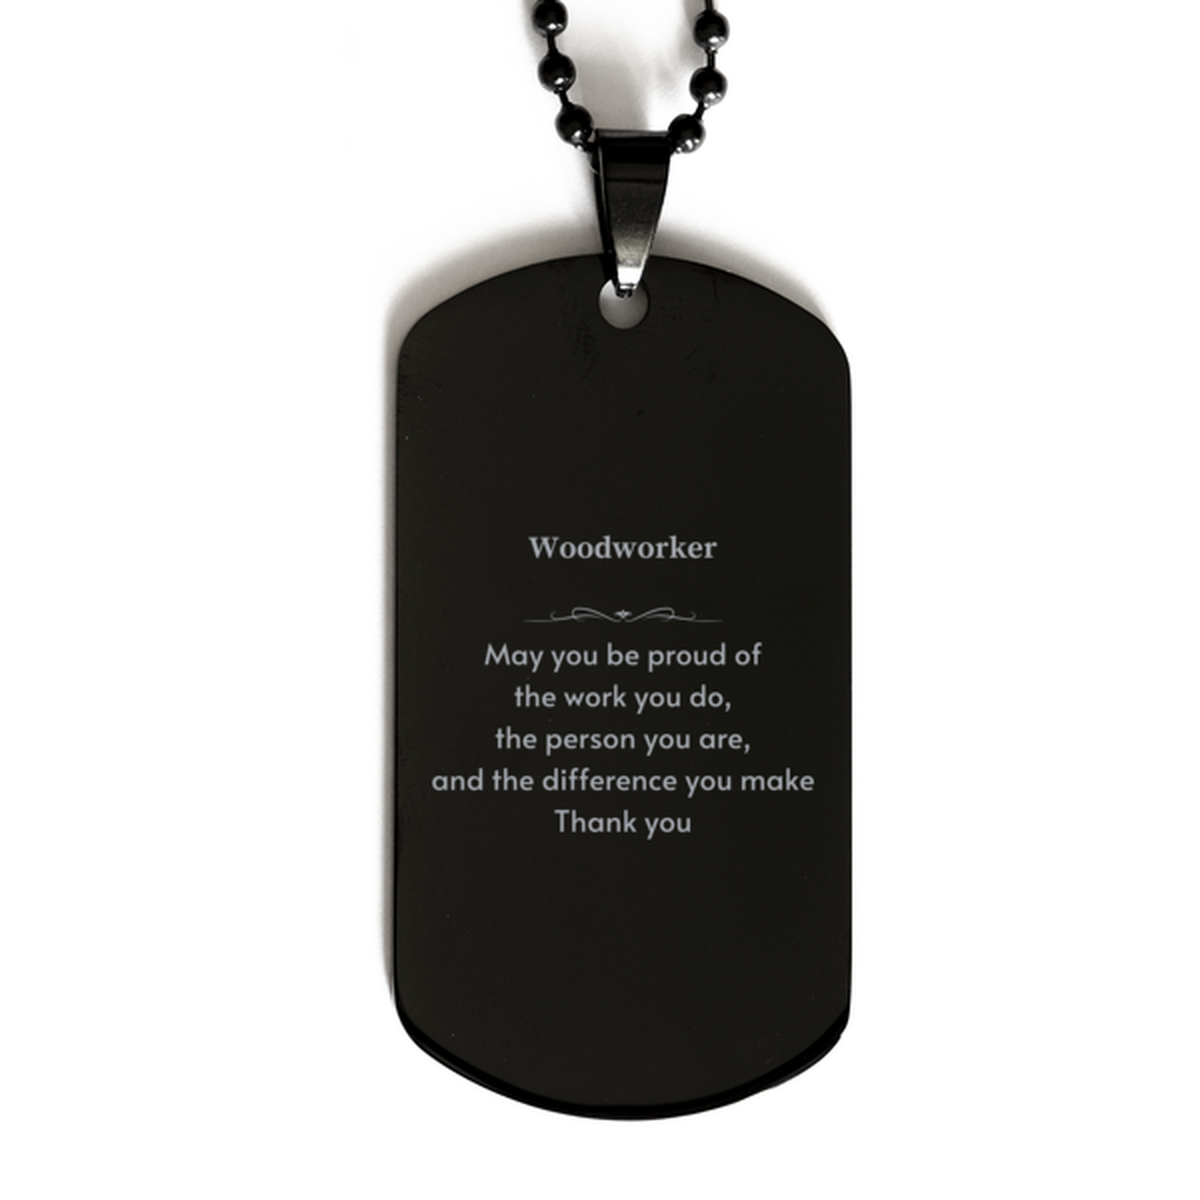 Heartwarming Black Dog Tag Retirement Coworkers Gifts for Woodworker, Woodworker May You be proud of the work you do, the person you are Gifts for Boss Men Women Friends